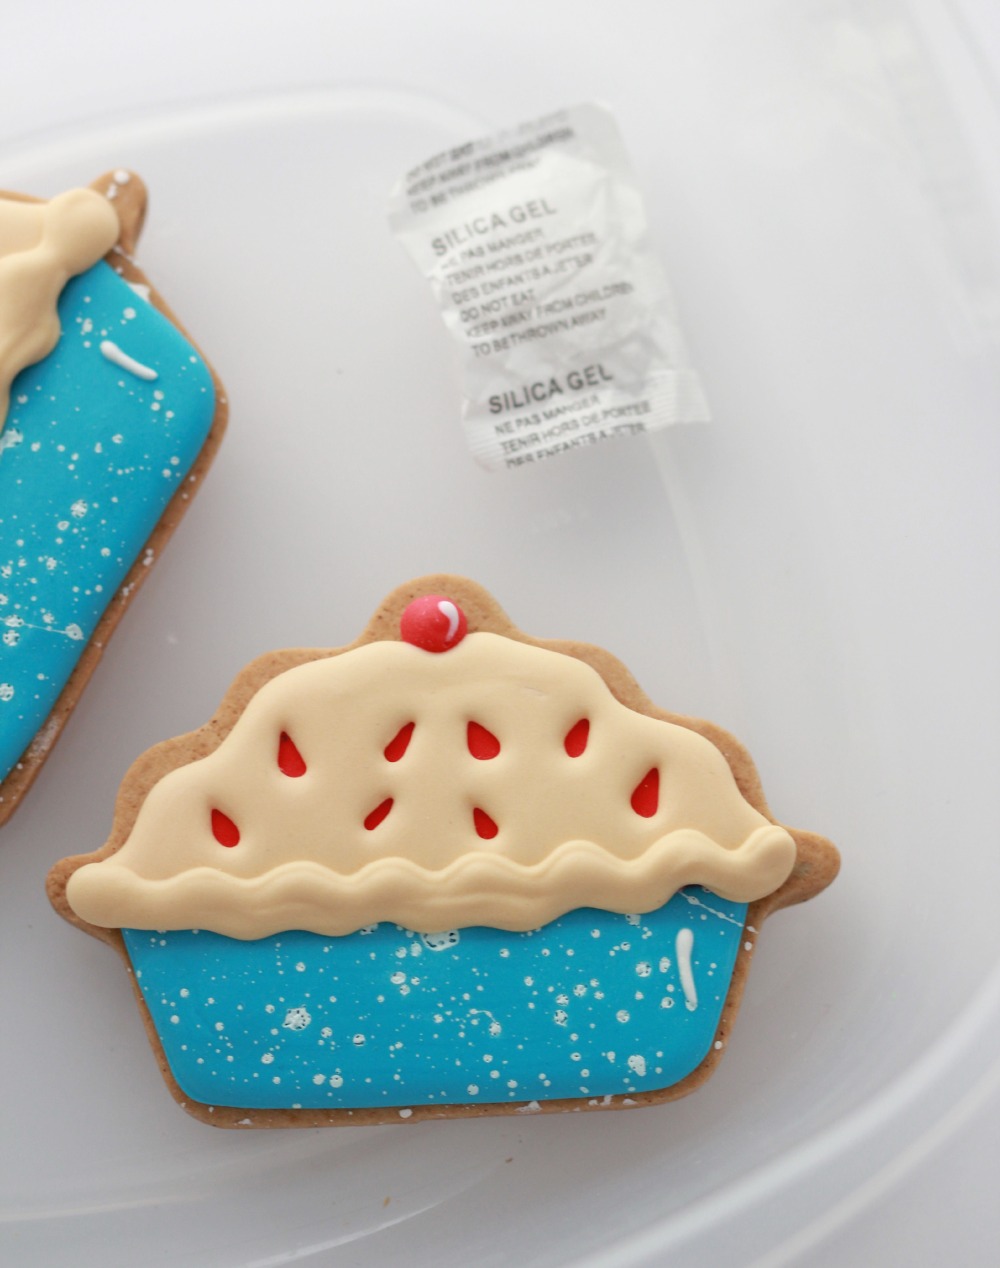 Can you store royal icing in the freezer?